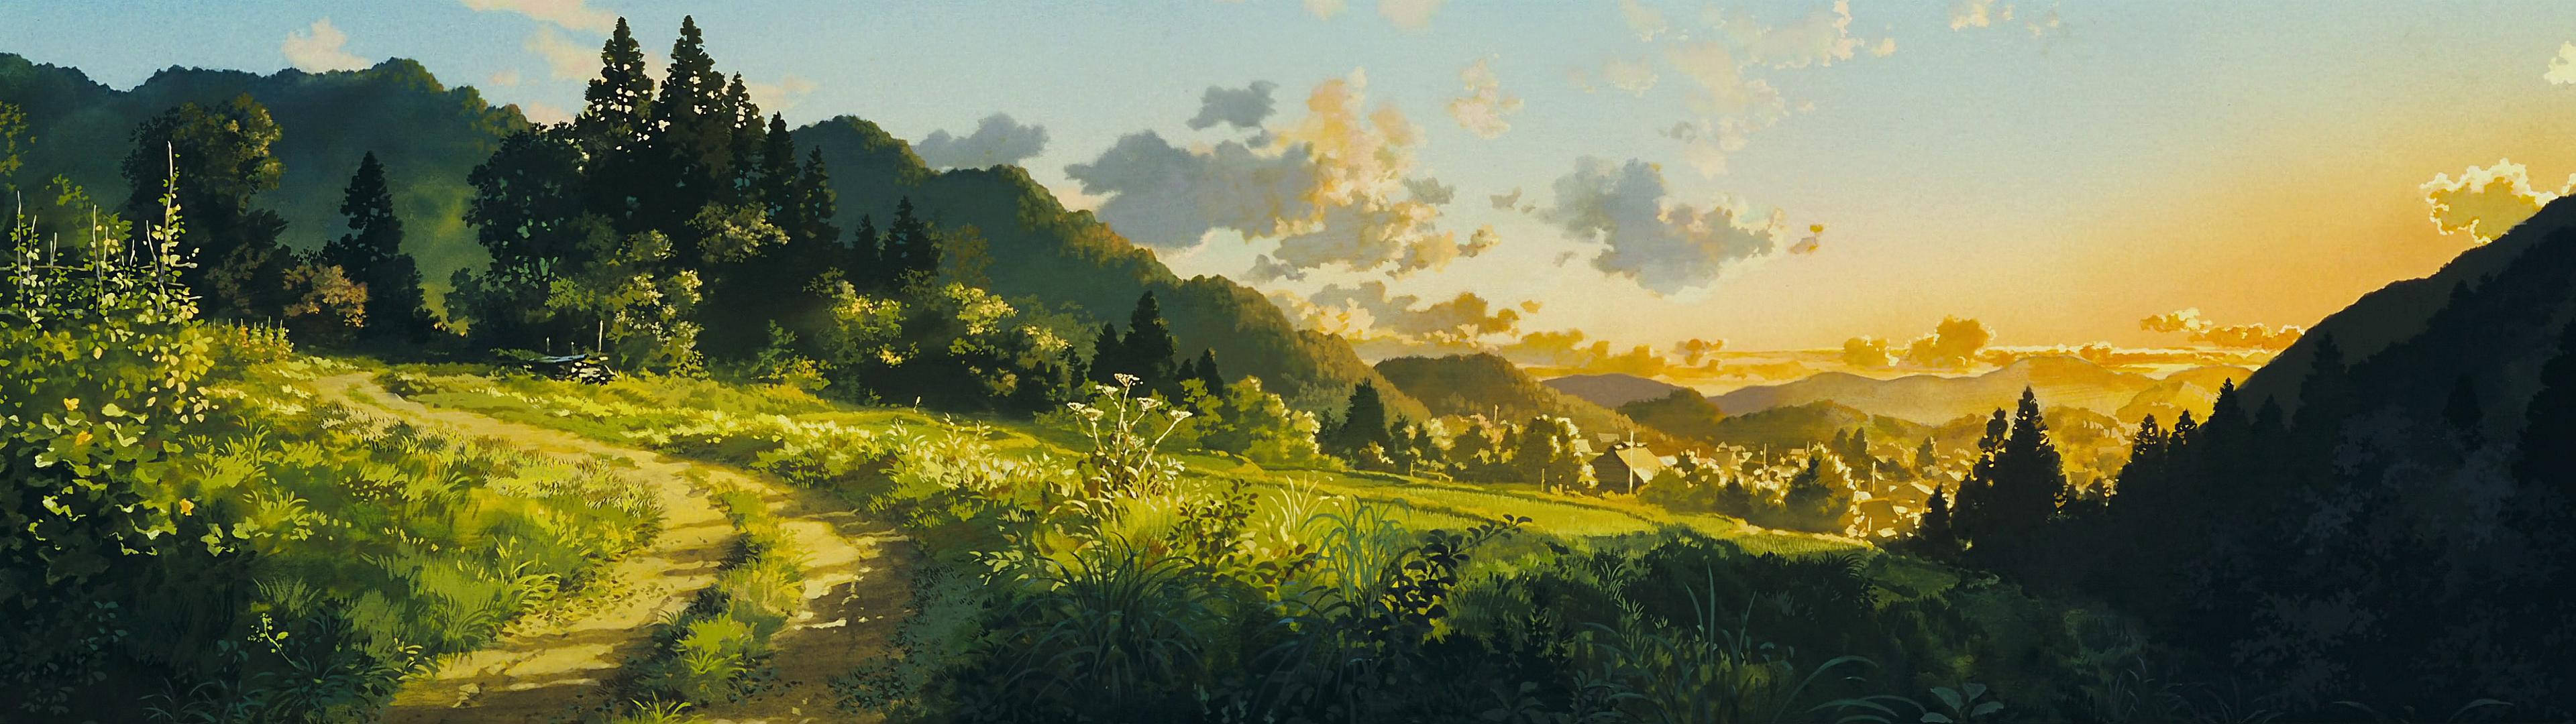 Anime inspired green landscape, perfect for dual monitor wallpaper Wallpaper